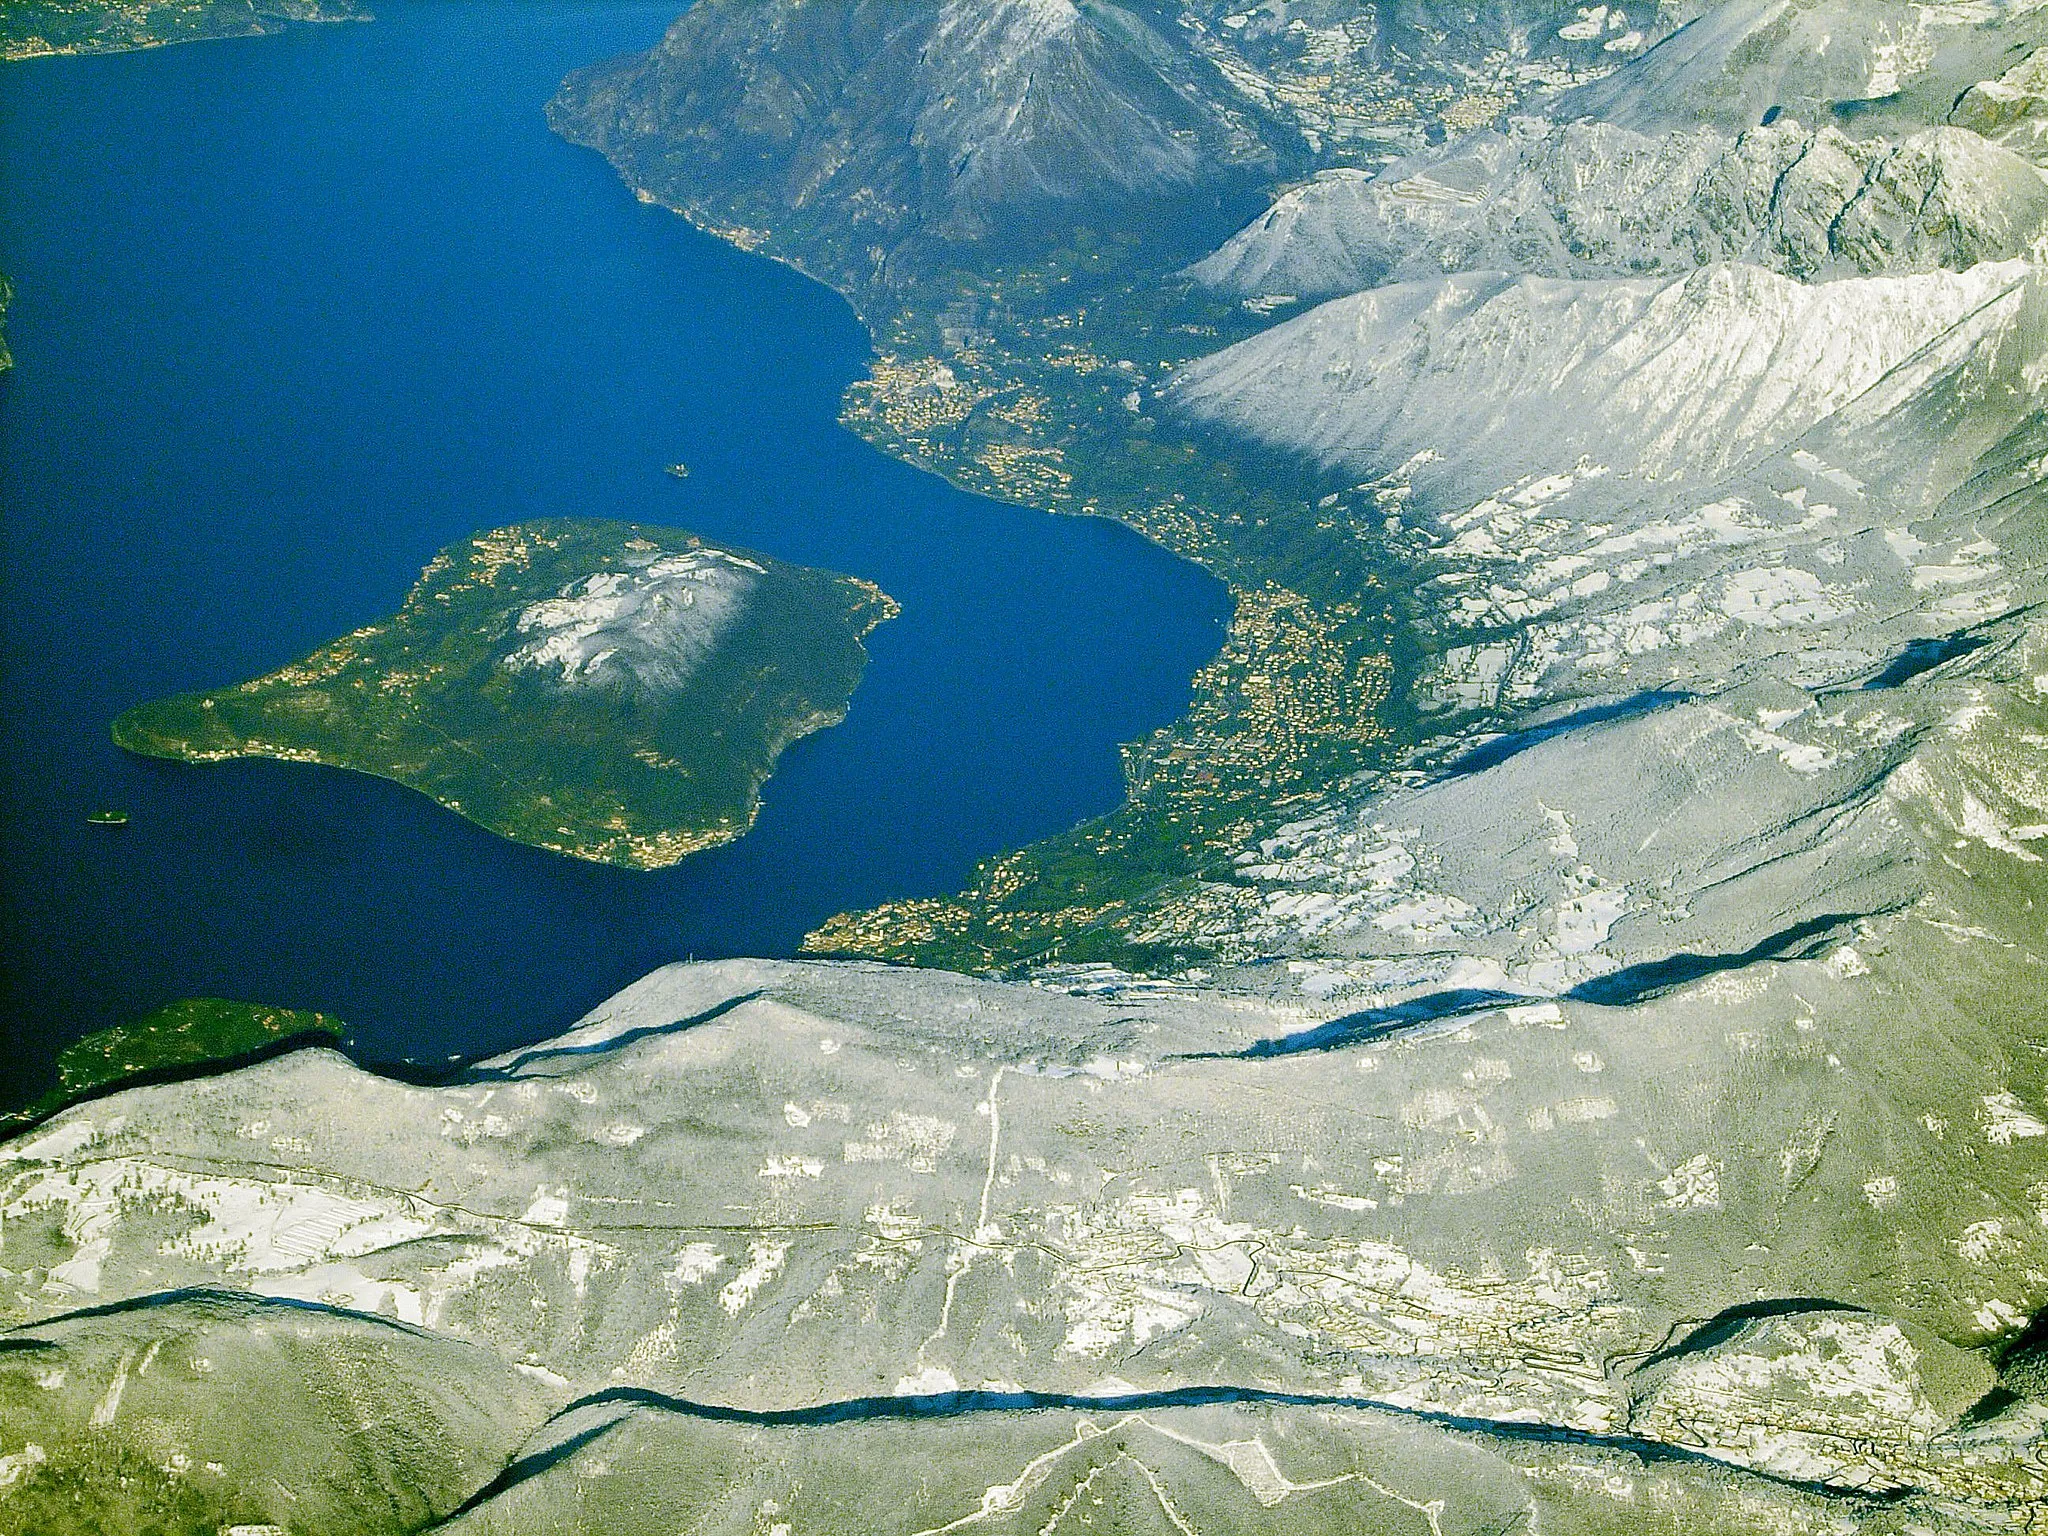 Photo showing: Aerial photograph of Lago d'Iseo, Italy. Particular focus on Isola monte Isola and Sale Marasino